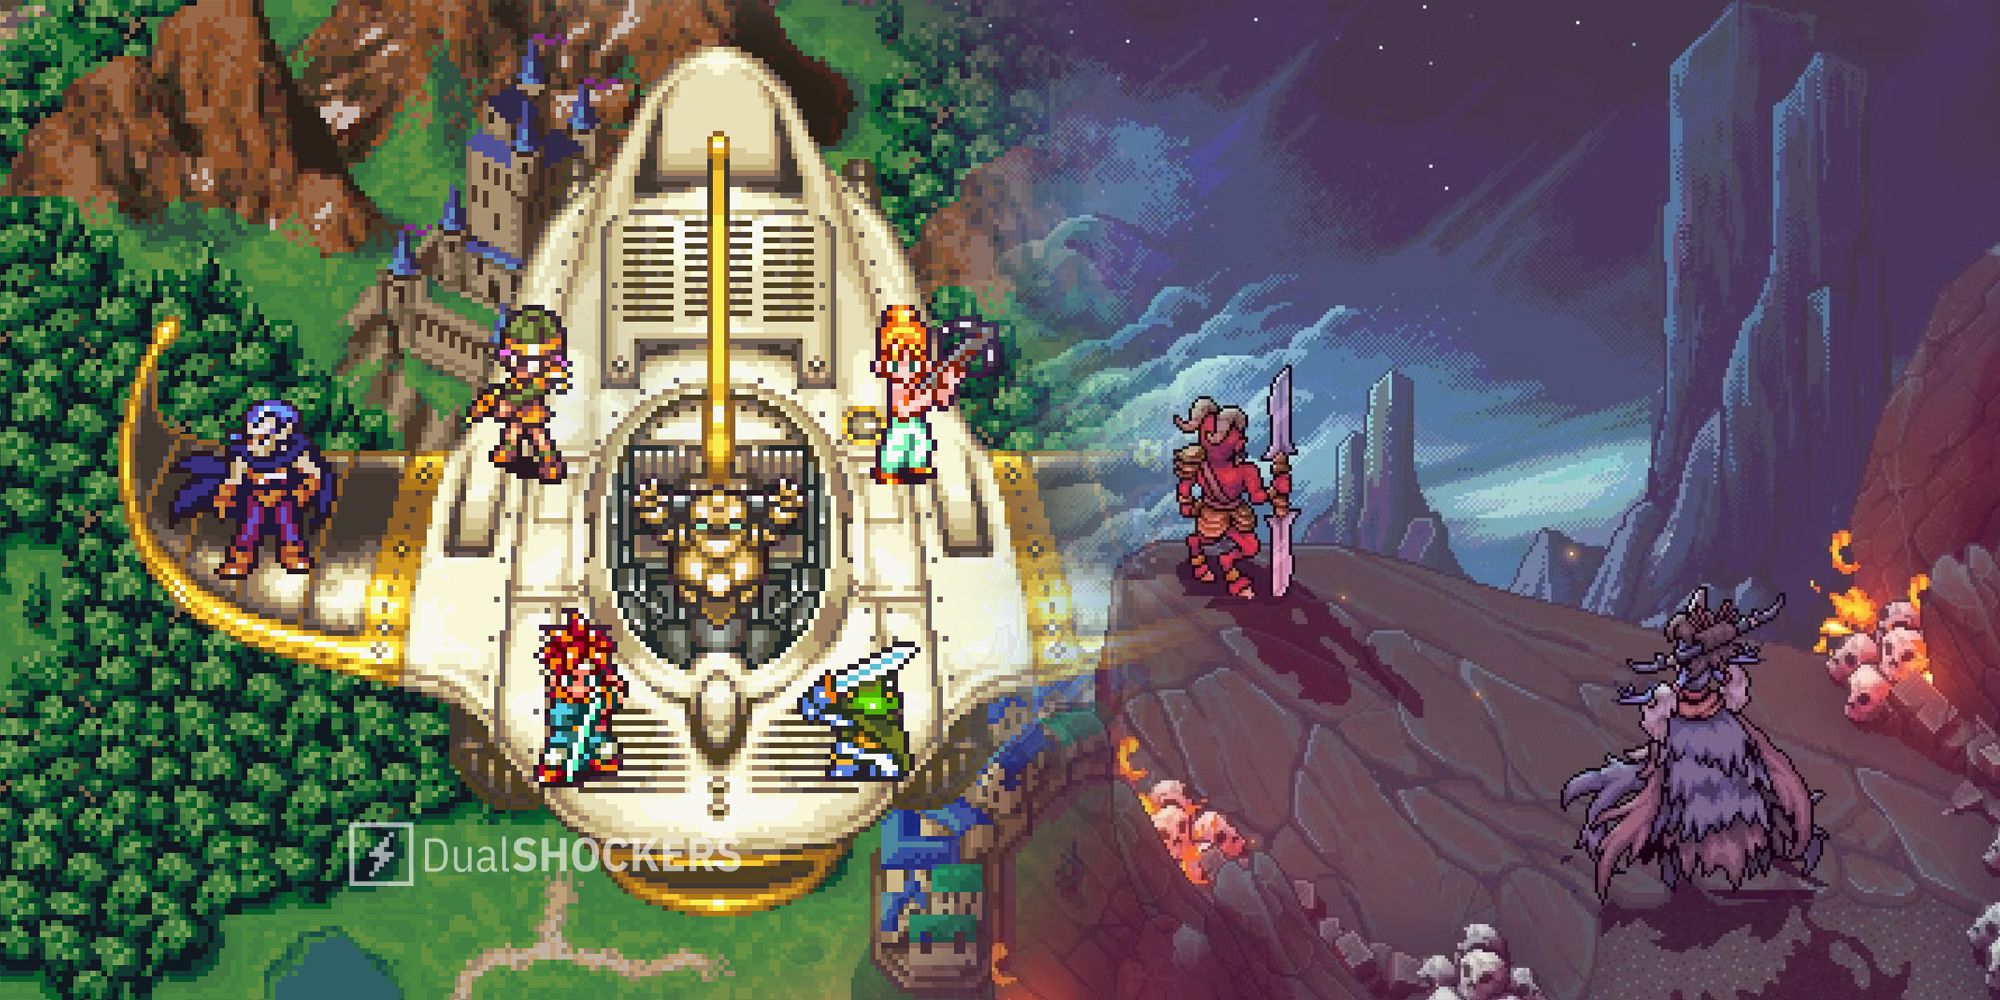 Sea Of Stars and Chrono Trigger gameplay